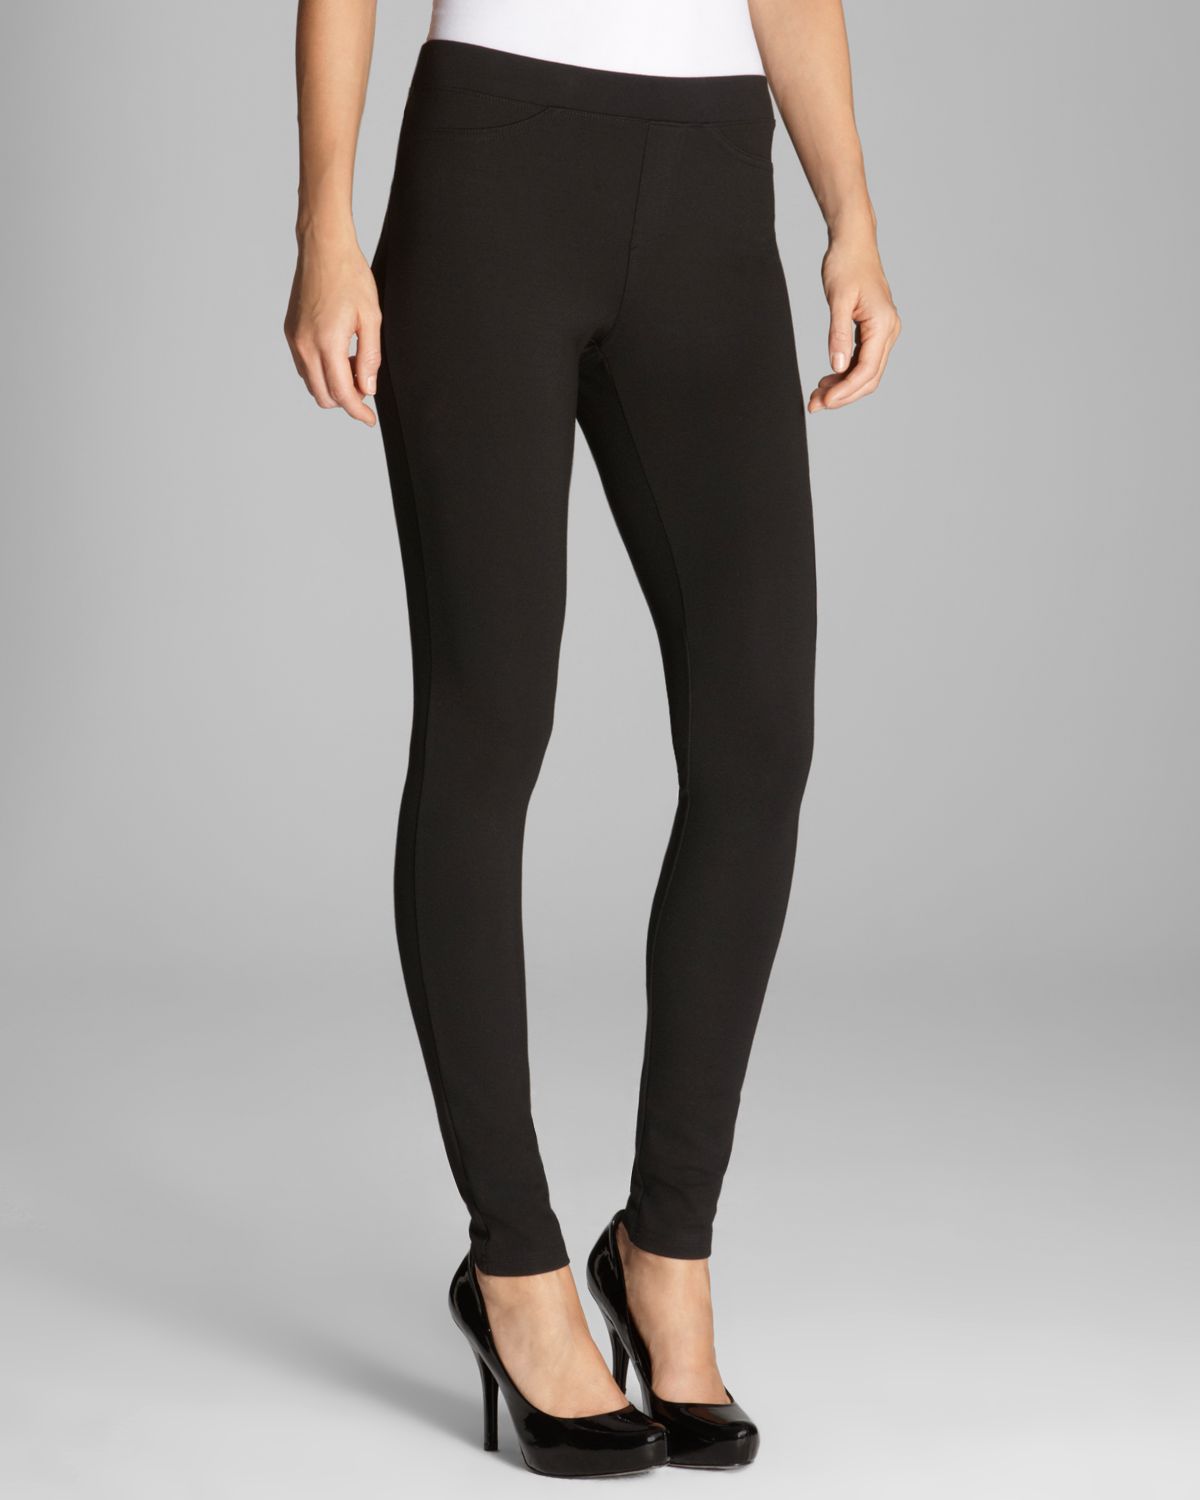 Fabletics On-The-Go High-Waisted Legging Womens Maplewood plus